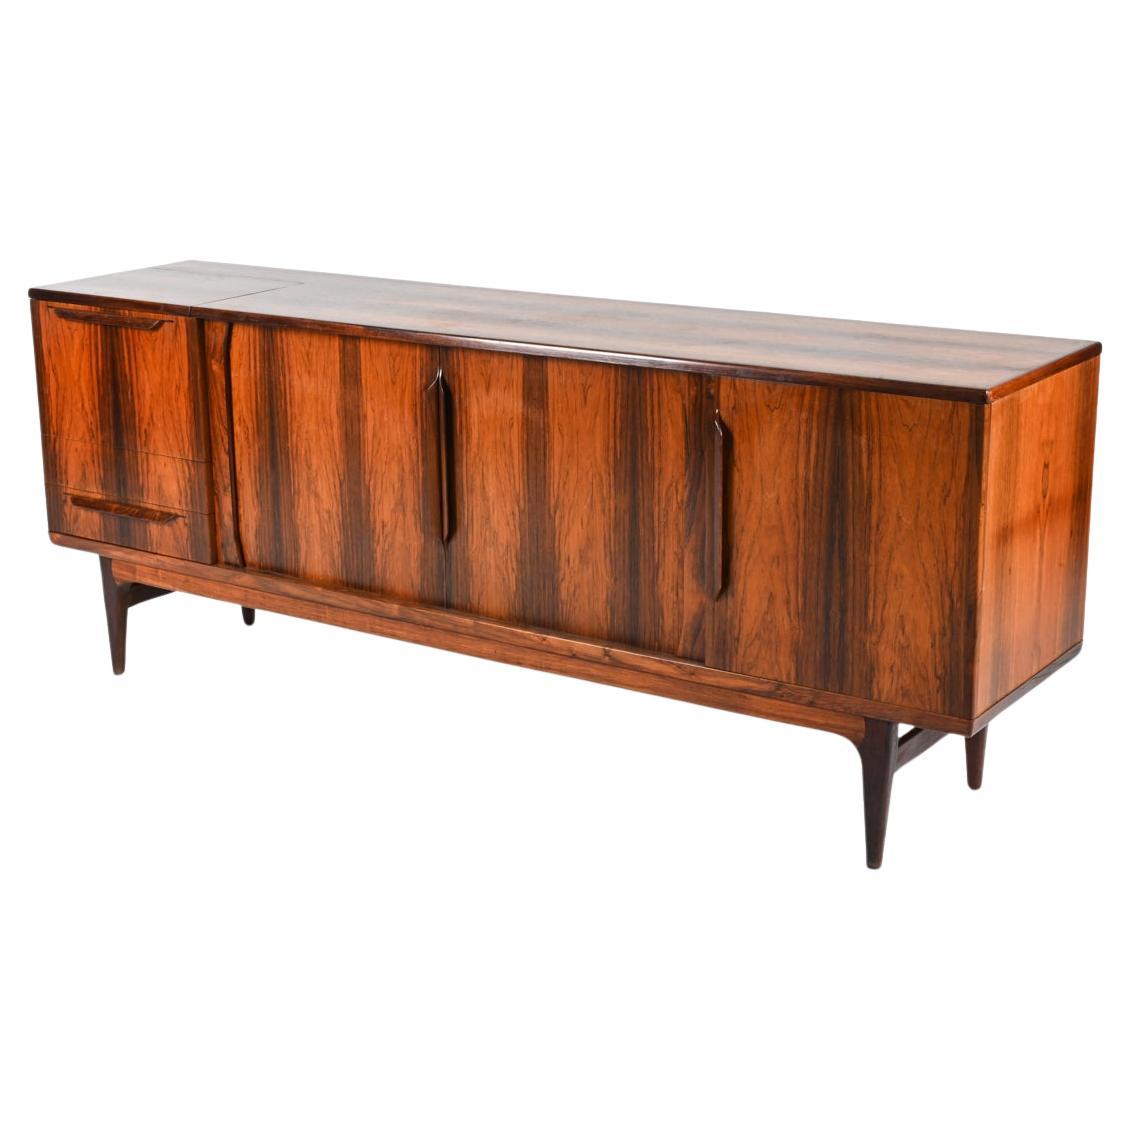 Rare Rosewood Sideboard With Bar by Johannes Andersen; Denmark, c. 1960's For Sale